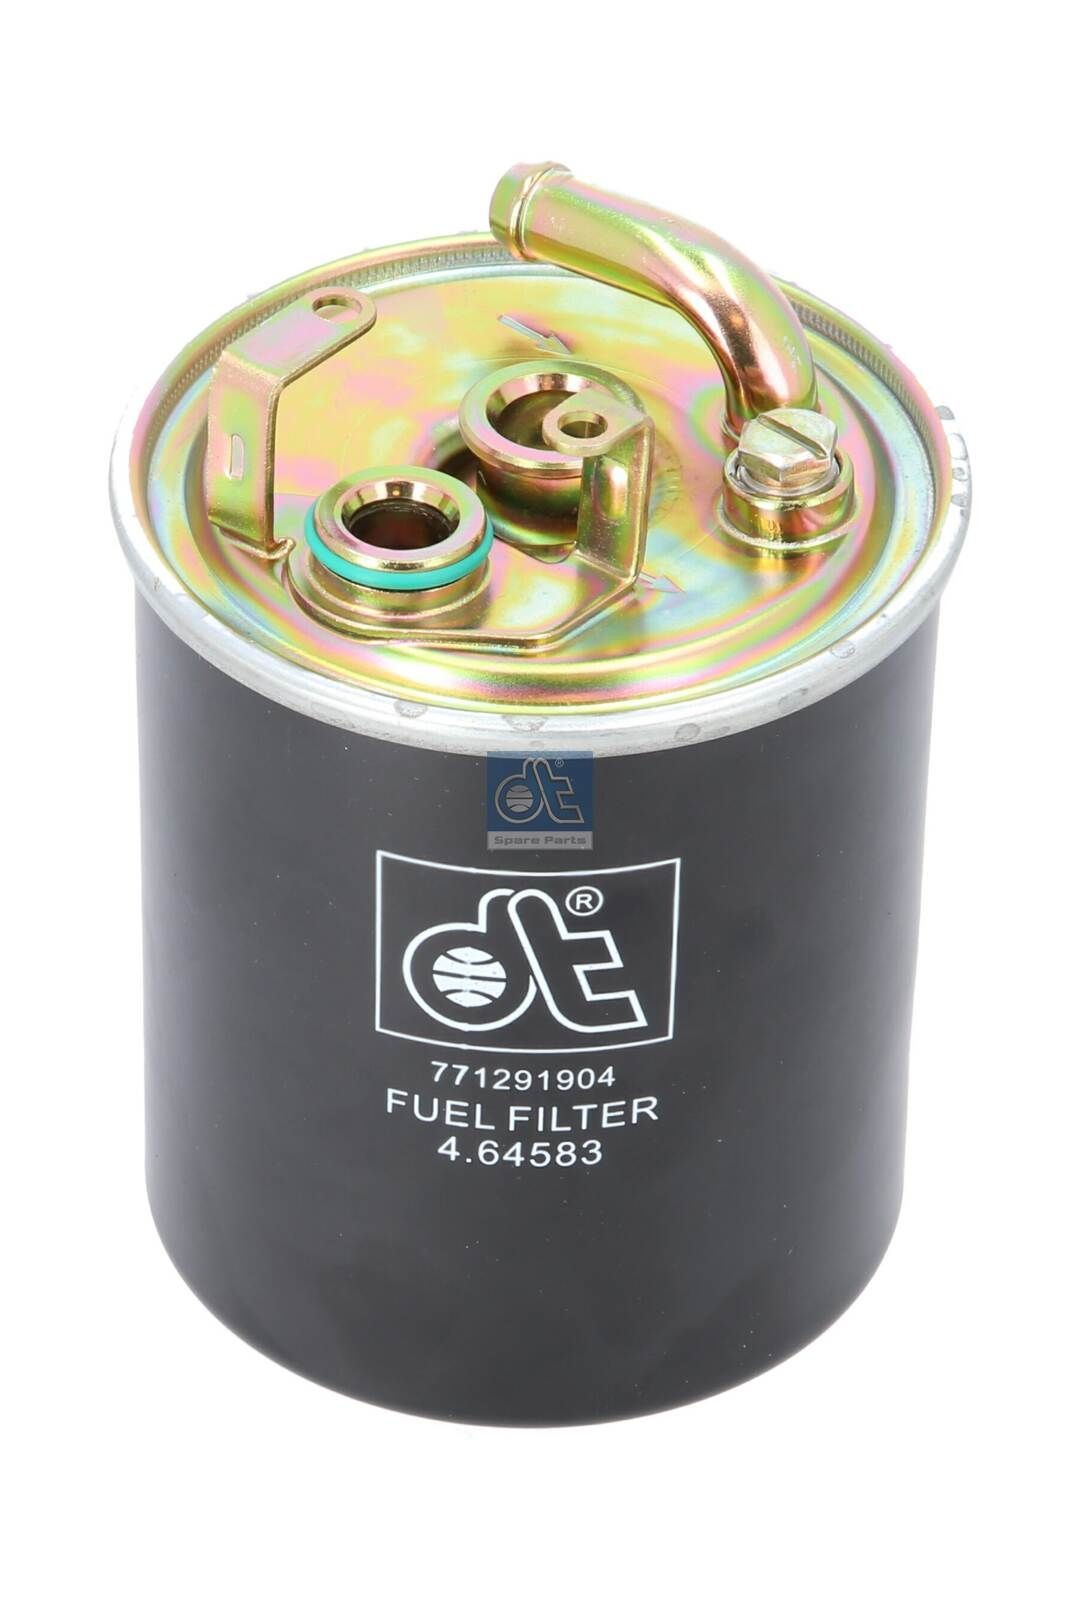 Great value for money - DT Spare Parts Fuel filter 4.64583